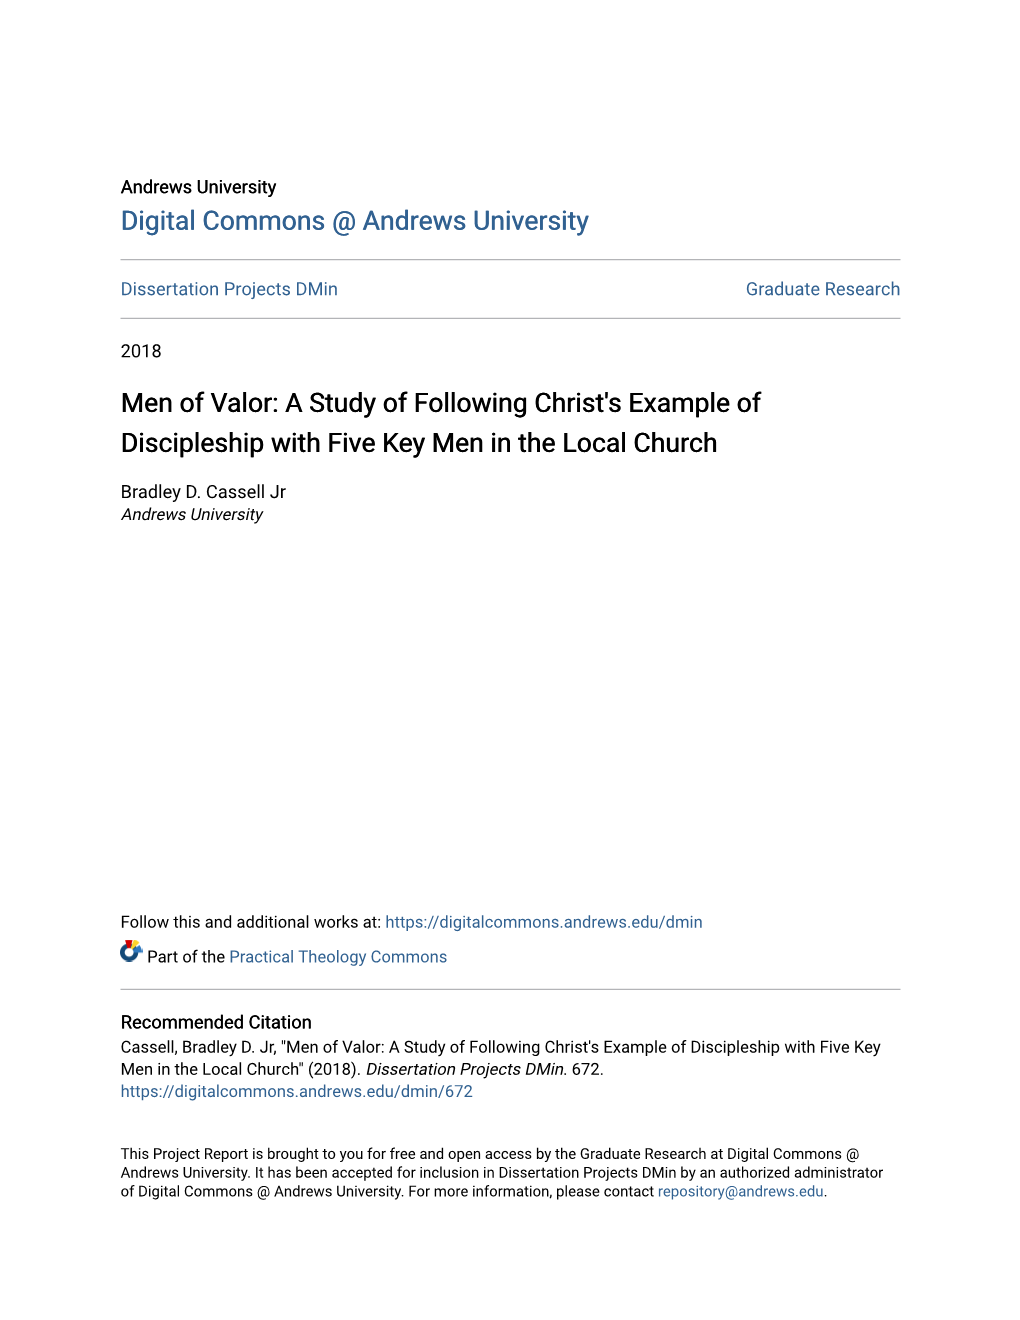 Men of Valor: a Study of Following Christ's Example of Discipleship with Five Key Men in the Local Church